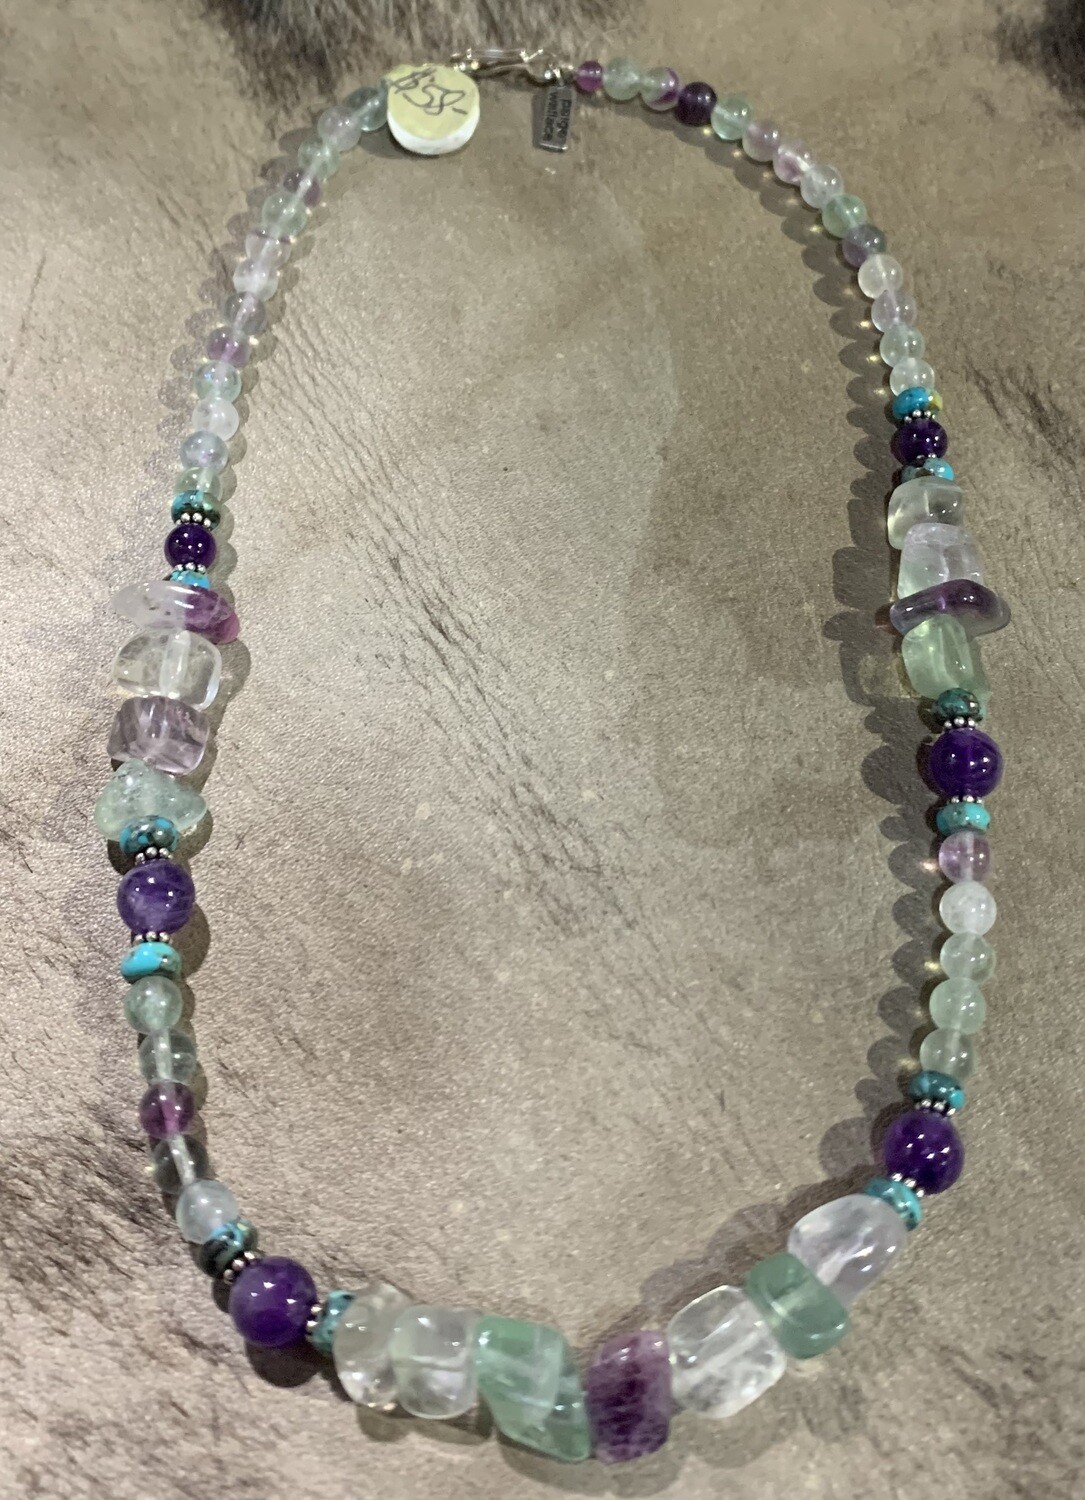 PAIGE WALLACE FLUORITE BEADED NECKLACE